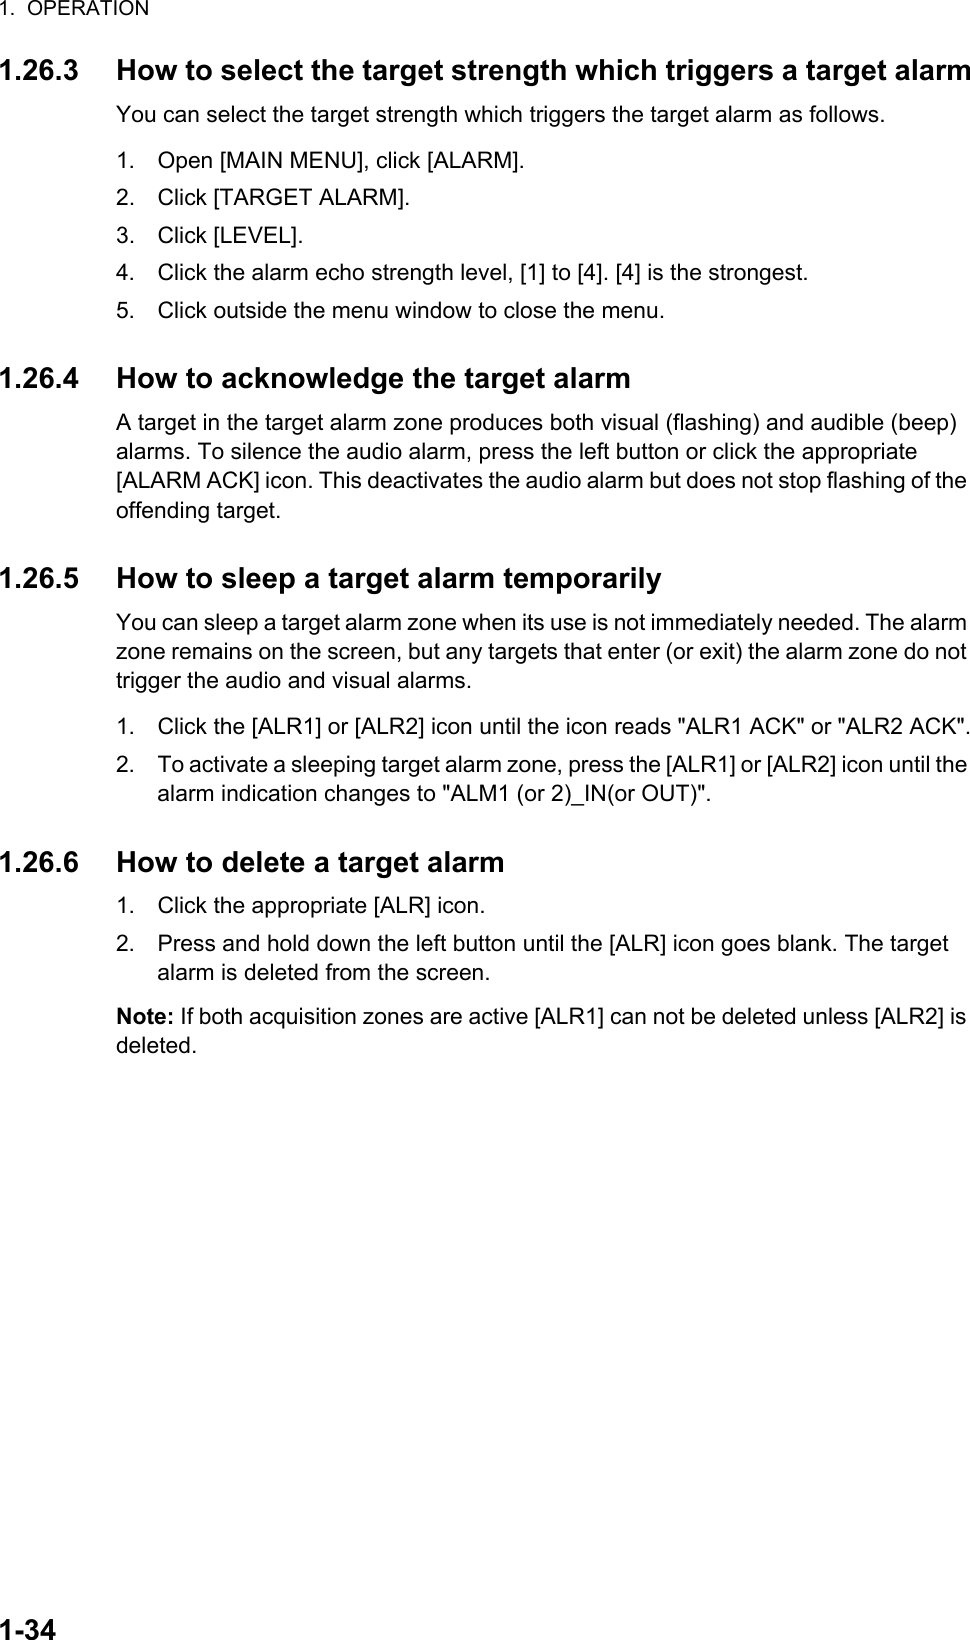 1.  OPERATION1-341.26.3 How to select the target strength which triggers a target alarmYou can select the target strength which triggers the target alarm as follows.1. Open [MAIN MENU], click [ALARM].2. Click [TARGET ALARM]. 3. Click [LEVEL].4. Click the alarm echo strength level, [1] to [4]. [4] is the strongest.5. Click outside the menu window to close the menu.1.26.4 How to acknowledge the target alarmA target in the target alarm zone produces both visual (flashing) and audible (beep) alarms. To silence the audio alarm, press the left button or click the appropriate [ALARM ACK] icon. This deactivates the audio alarm but does not stop flashing of the offending target.1.26.5 How to sleep a target alarm temporarilyYou can sleep a target alarm zone when its use is not immediately needed. The alarm zone remains on the screen, but any targets that enter (or exit) the alarm zone do not trigger the audio and visual alarms.1. Click the [ALR1] or [ALR2] icon until the icon reads &quot;ALR1 ACK&quot; or &quot;ALR2 ACK&quot;.2. To activate a sleeping target alarm zone, press the [ALR1] or [ALR2] icon until the alarm indication changes to &quot;ALM1 (or 2)_IN(or OUT)&quot;.1.26.6 How to delete a target alarm1. Click the appropriate [ALR] icon.2. Press and hold down the left button until the [ALR] icon goes blank. The target alarm is deleted from the screen.Note: If both acquisition zones are active [ALR1] can not be deleted unless [ALR2] is deleted.